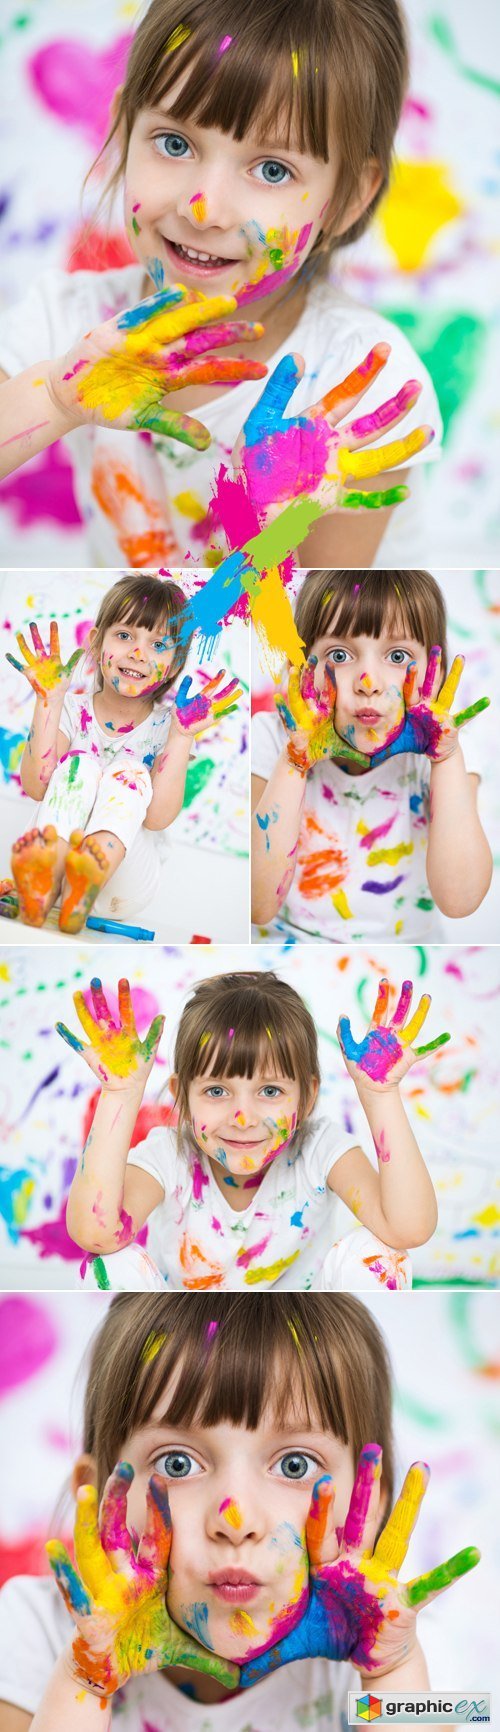 Stock Photo - Girl with Painted Hands